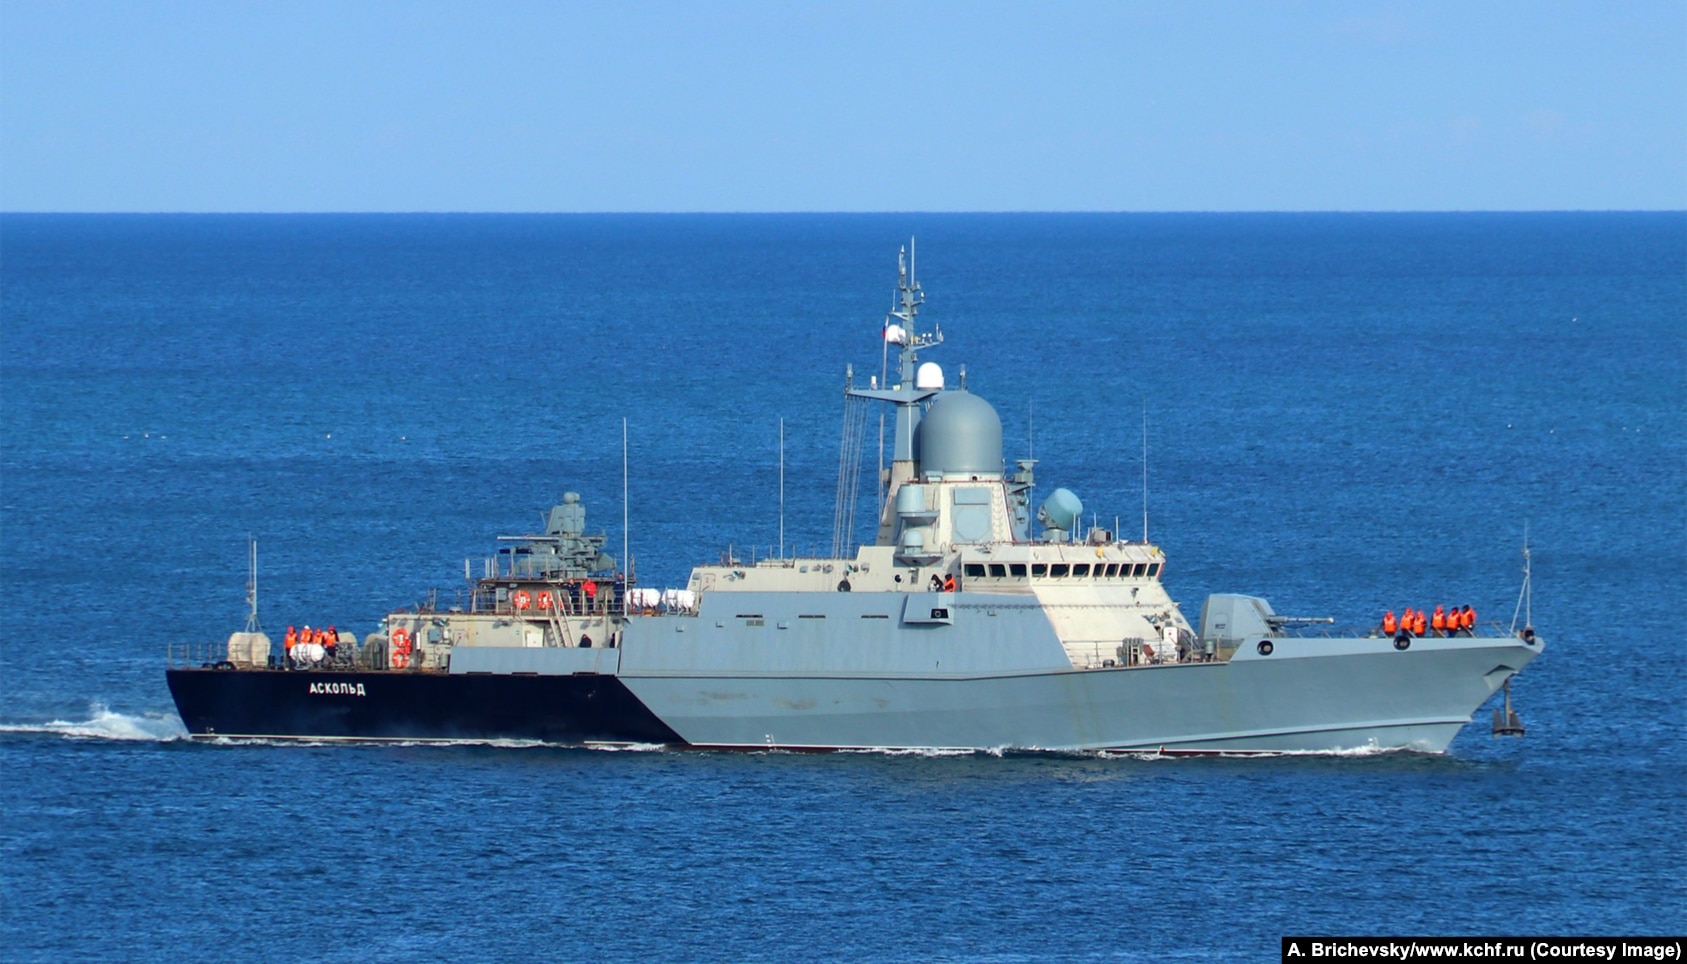 The Askold corvette undergoes sea trials in October 2022.&nbsp;&nbsp; &nbsp; On November 4, the Karakurt-class Askold corvette, which had yet to enter service with the Russian Navy, was struck by an apparent cruise missile. Ukraine later announced the ship&#39;s &quot;destruction.&quot; Russia&rsquo;s Defense Ministry described it as &quot;damaged.&quot;&nbsp; &nbsp; Karakurt corvettes are capable of launching up to eight cruise missiles and are equipped with a version of the Pantsir antiaircraft missile system.&nbsp;&nbsp; 